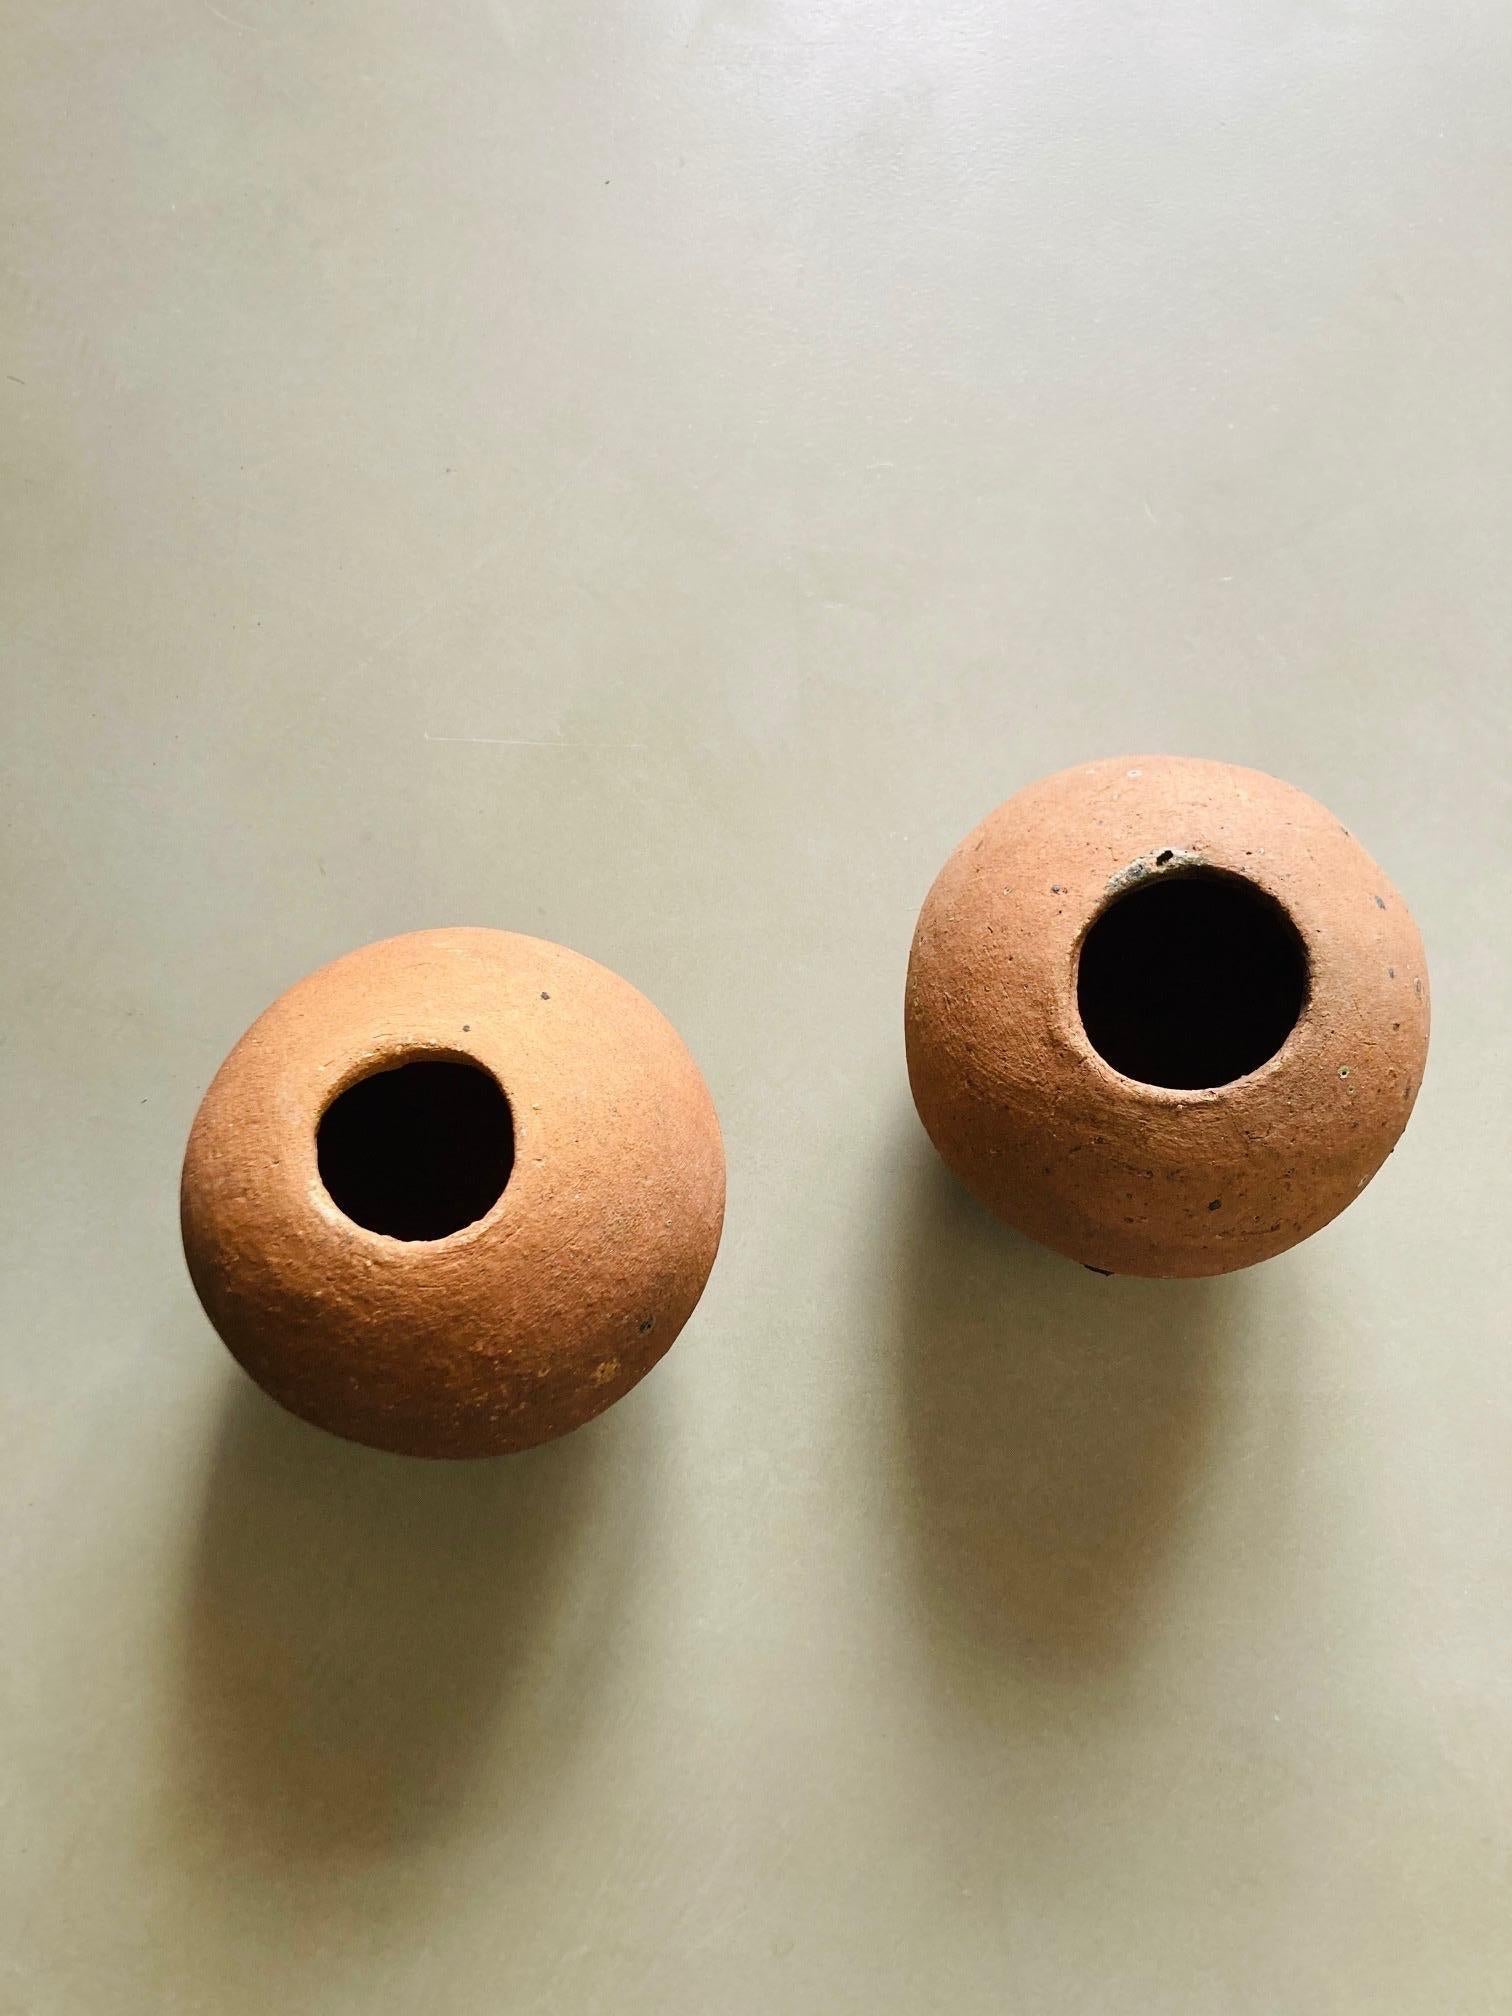 American Classical Round Ceramic Vases or Decorative Balls 1970 Pink Color by Guy Bareff For Sale